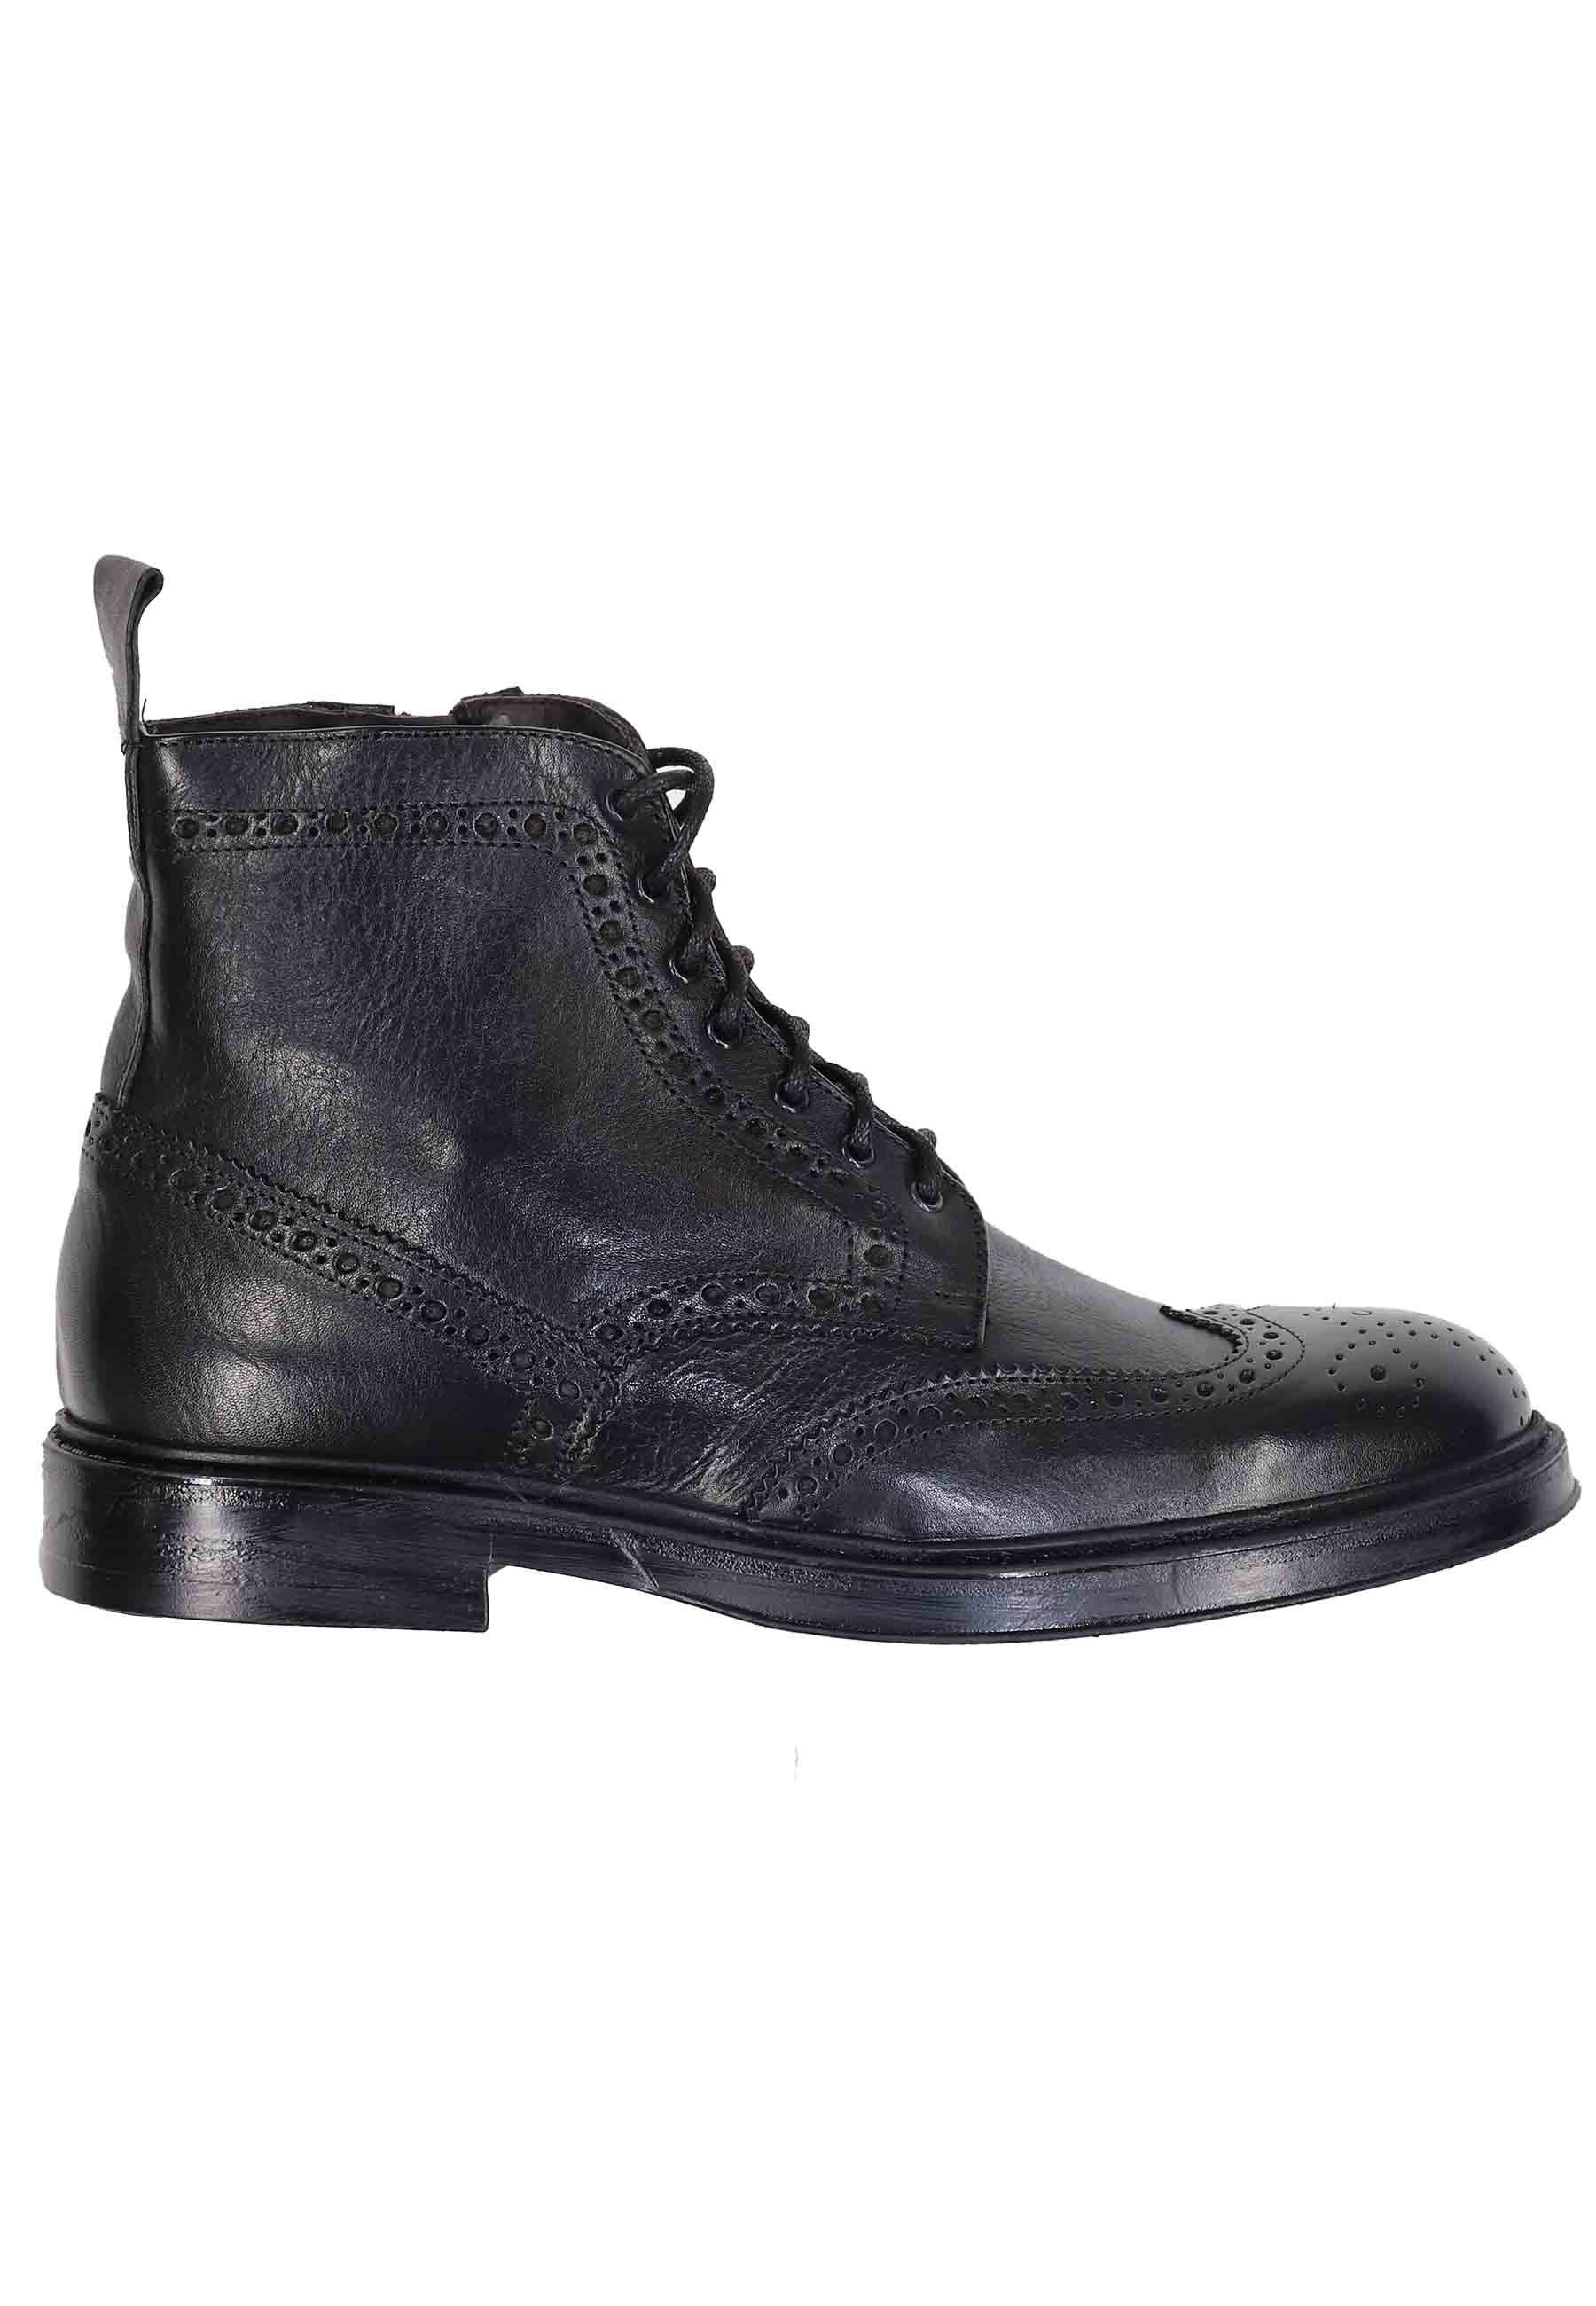 Men's lace-up ankle boots in black leather with stitching and rubber sole